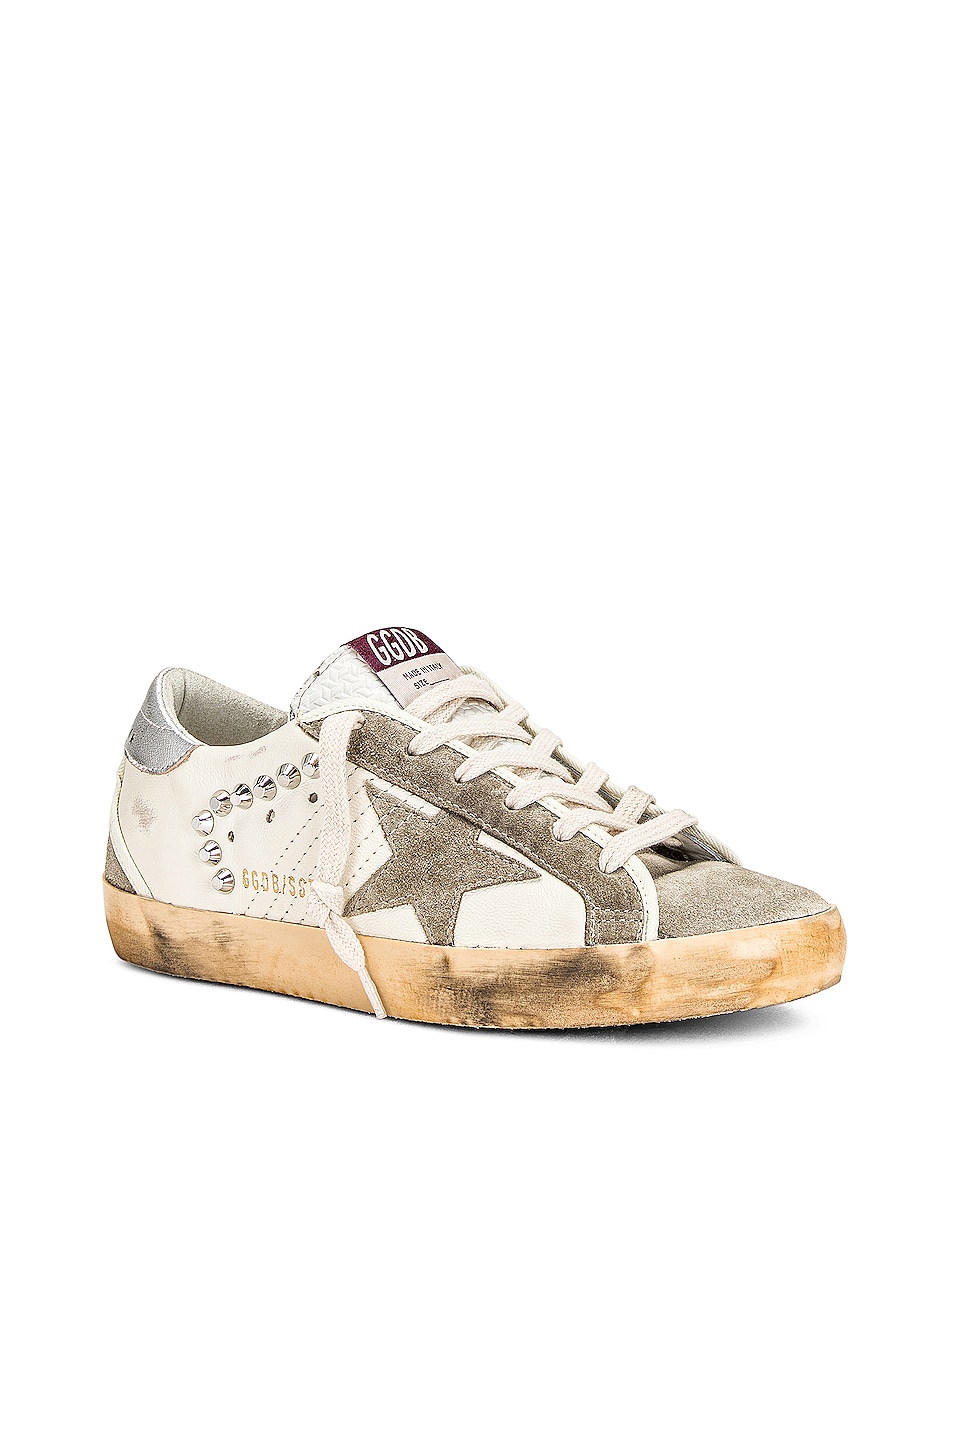 GOLDEN GOOSE | Luxury Womens Clothing, Jeans, Shoes & Sneakers